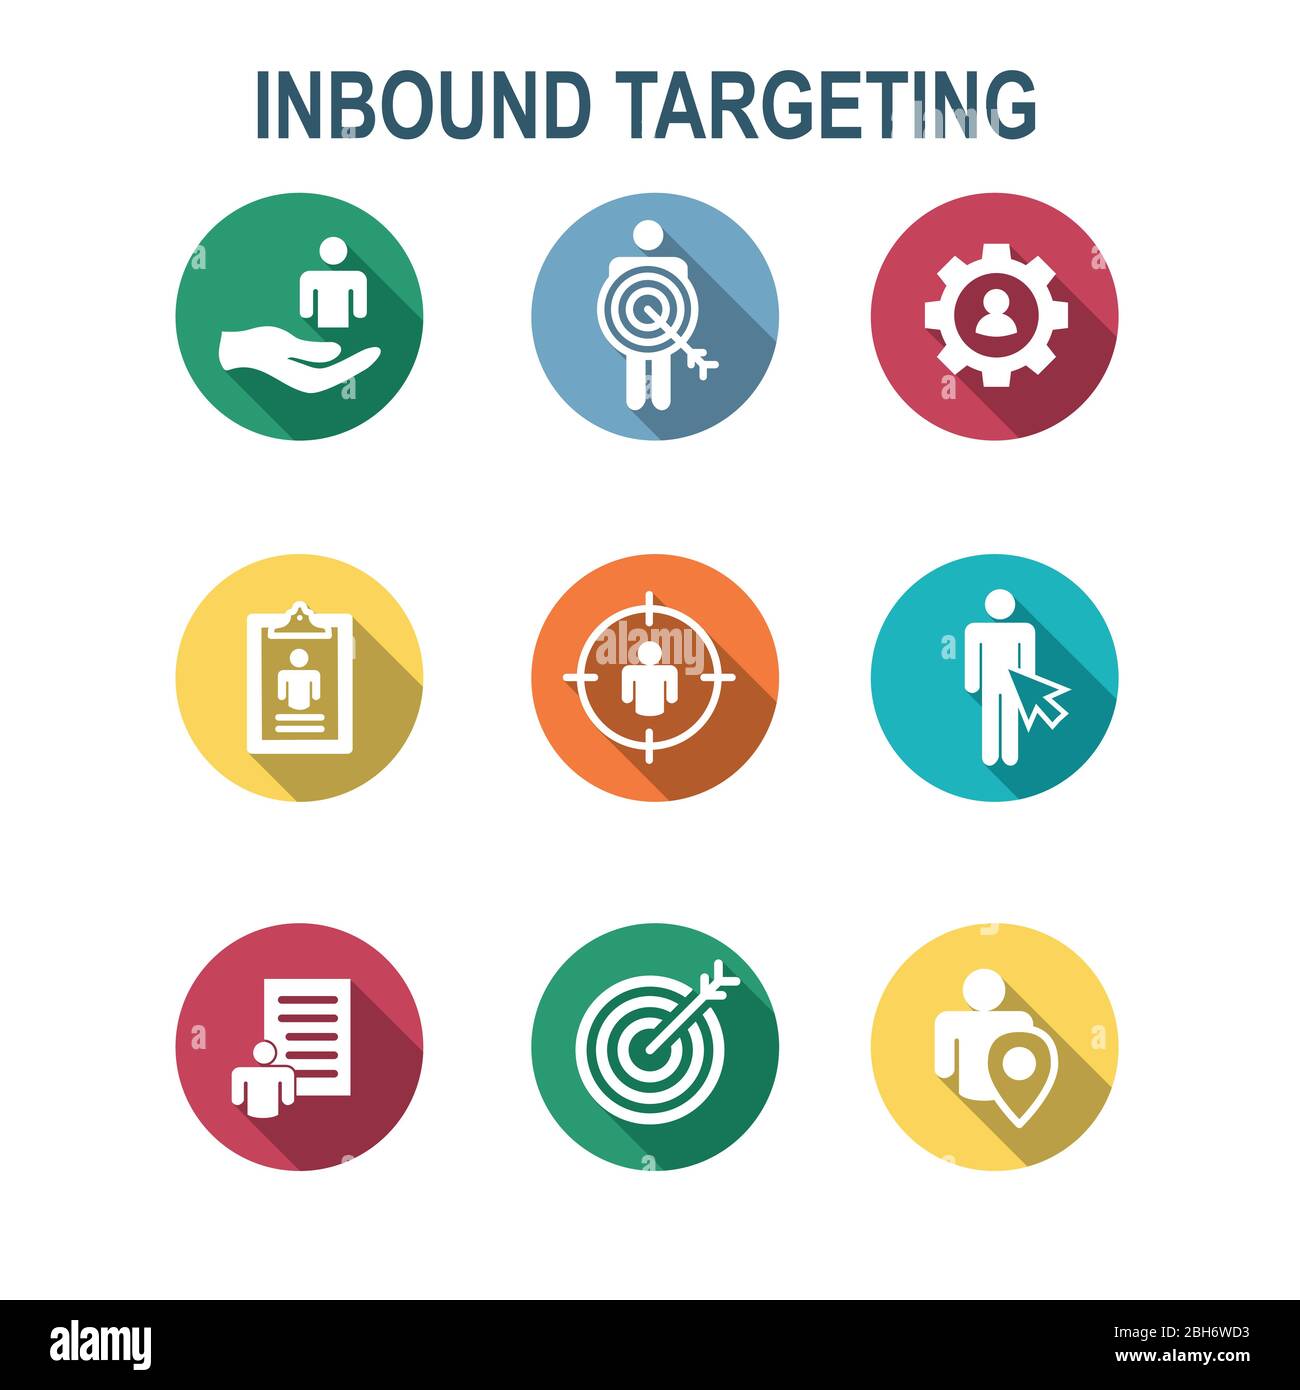 Inbound Marketing Icons w targeting imagery to show buyers and customers Stock Vector